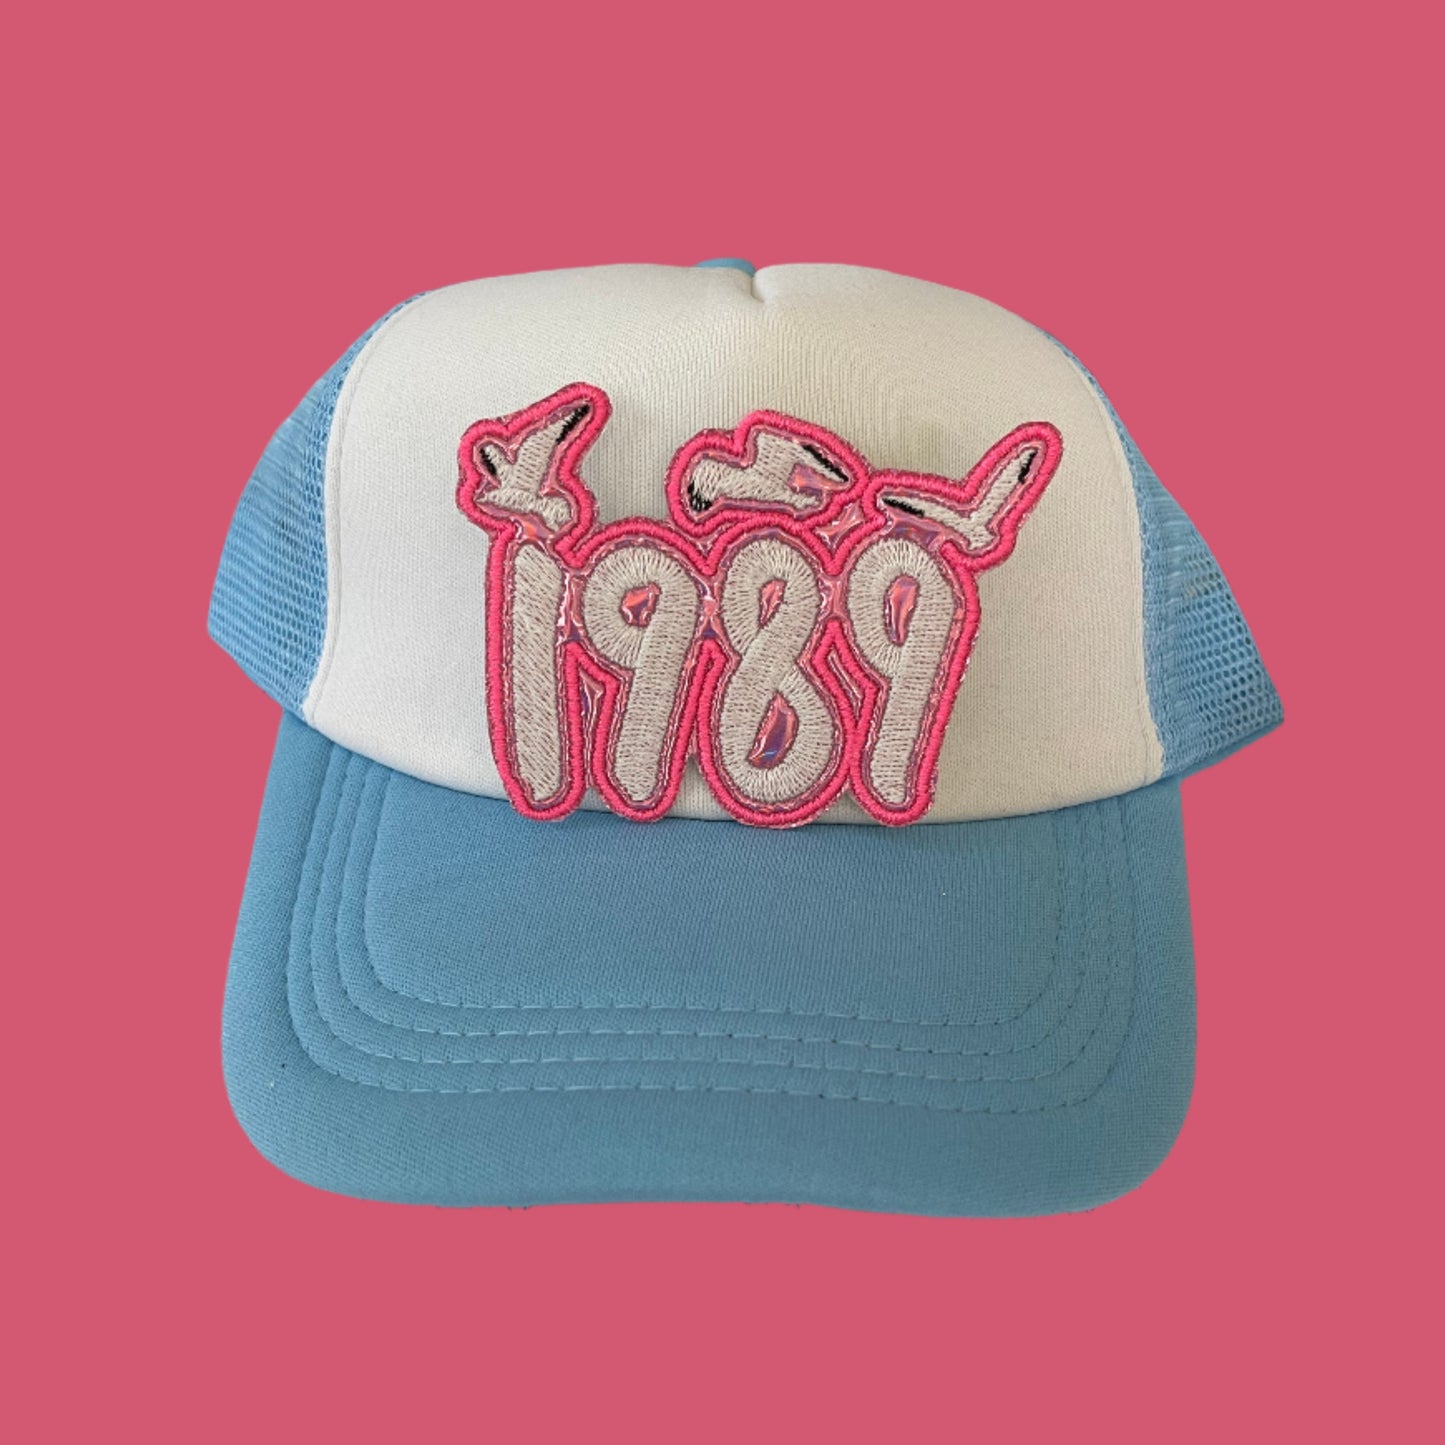 Handmade Taylor Swift inspired "1989" iron-on patch featuring bold pink and white numbers with a whimsical design.